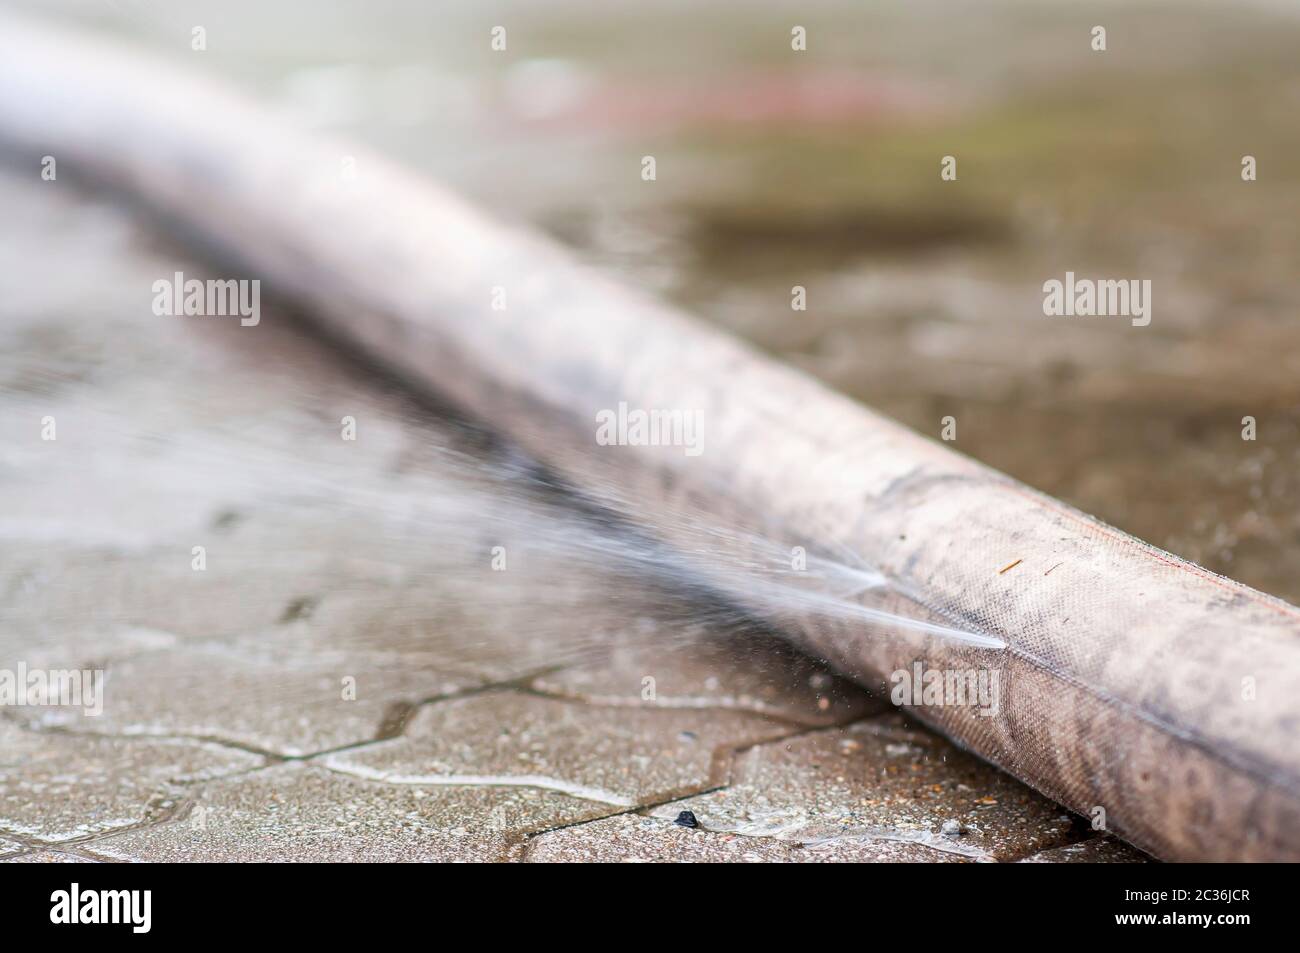 Leaky fire hose to extinguish fire, water is spilled, a ruptured hose. Stock Photo